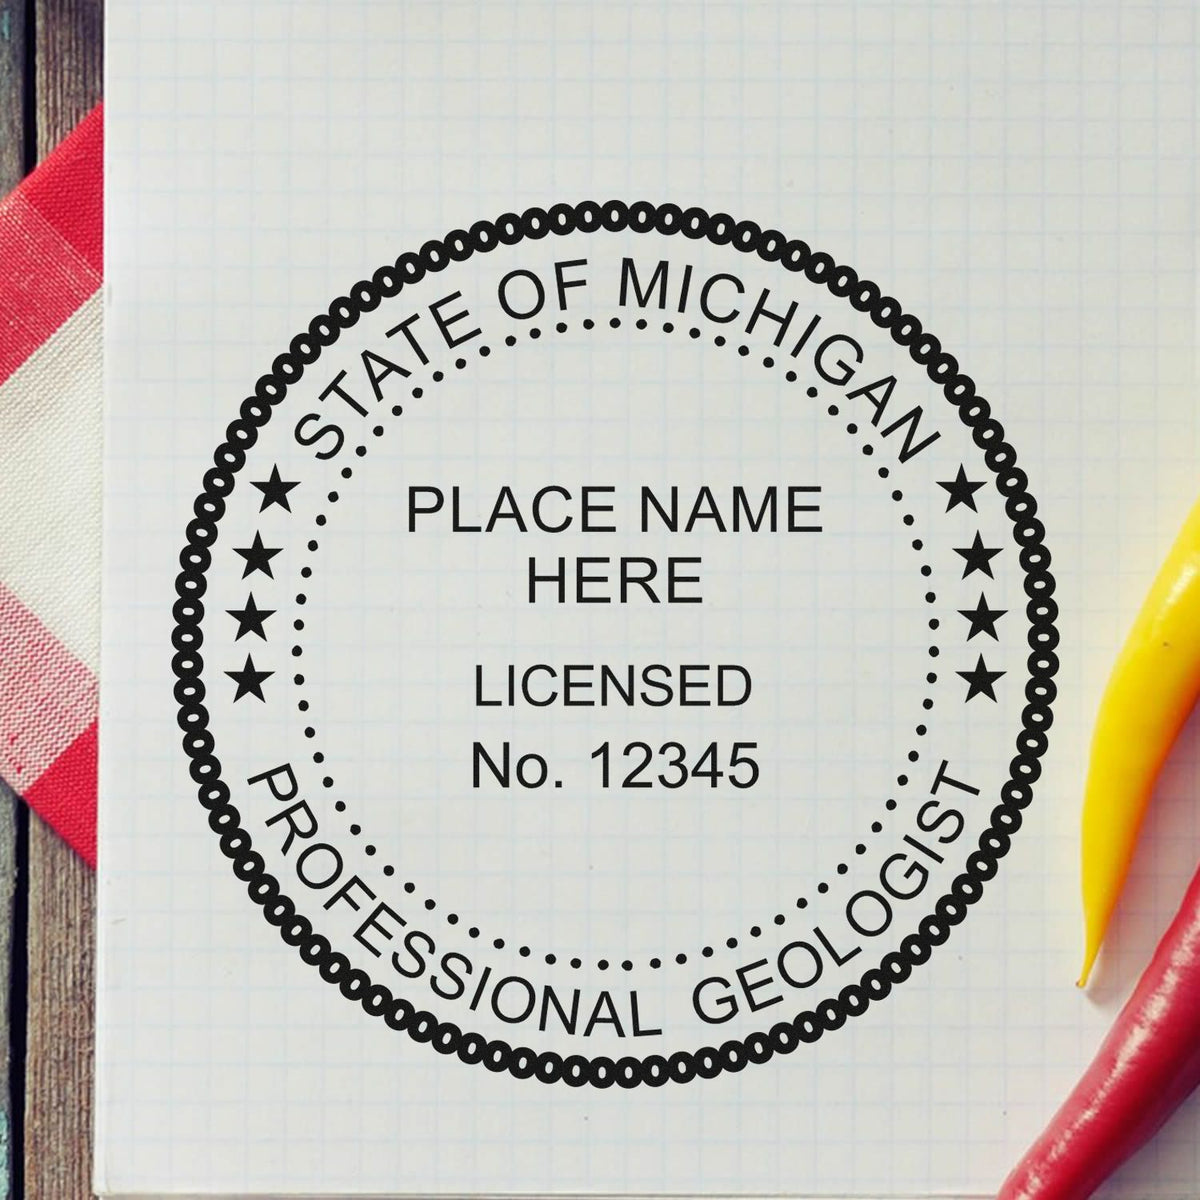 A photograph of the Michigan Professional Geologist Seal Stamp stamp impression reveals a vivid, professional image of the on paper.